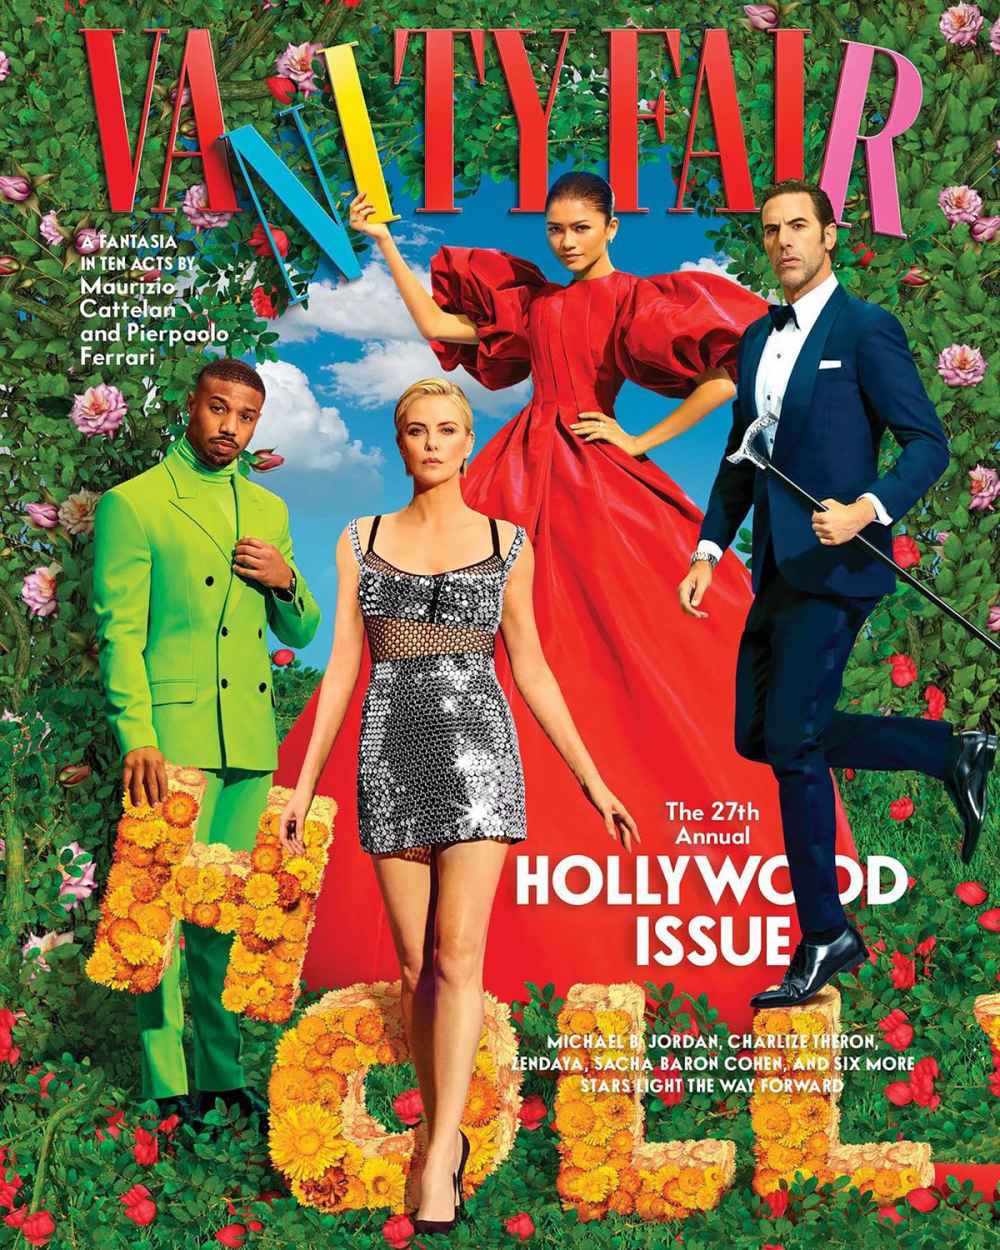 Vanity Fair’s Epic Hollywood Cover Features Zendaya, Daniel Levy and More